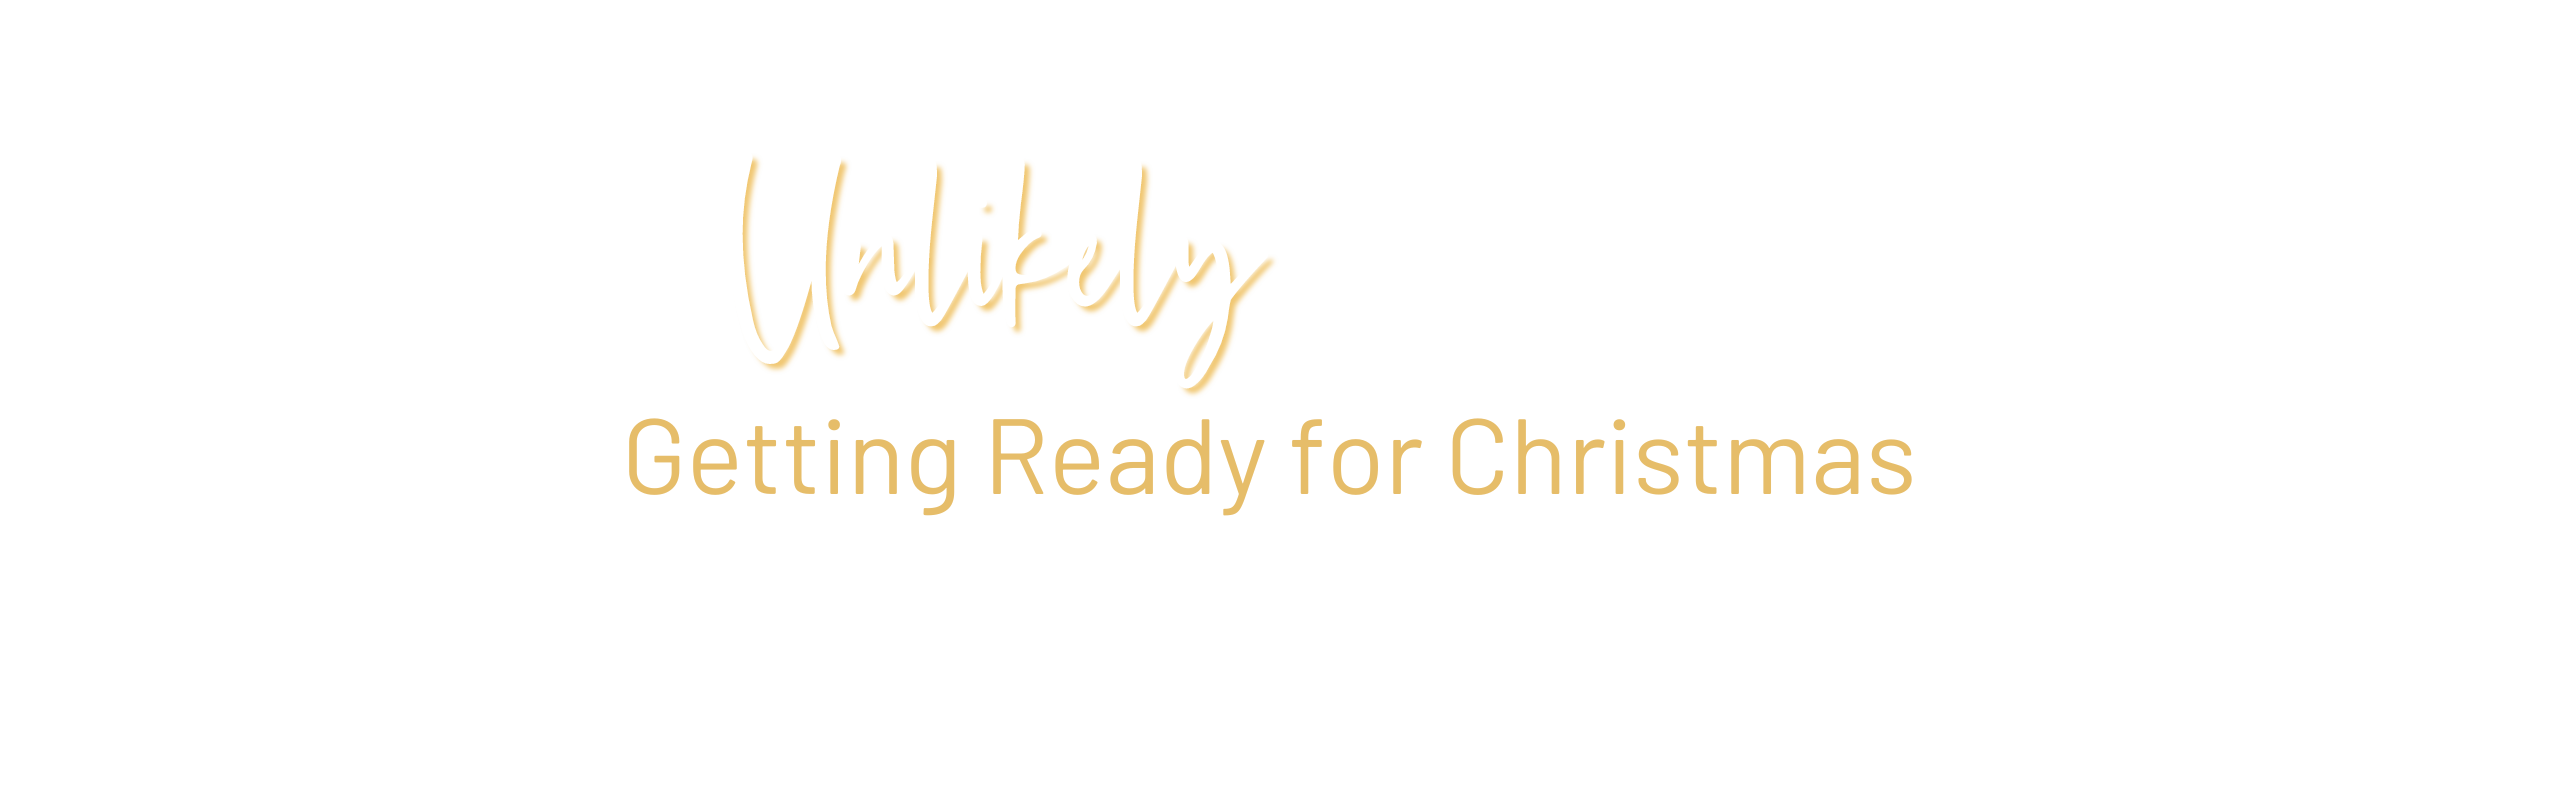 Unlikely Experience - Banner Text